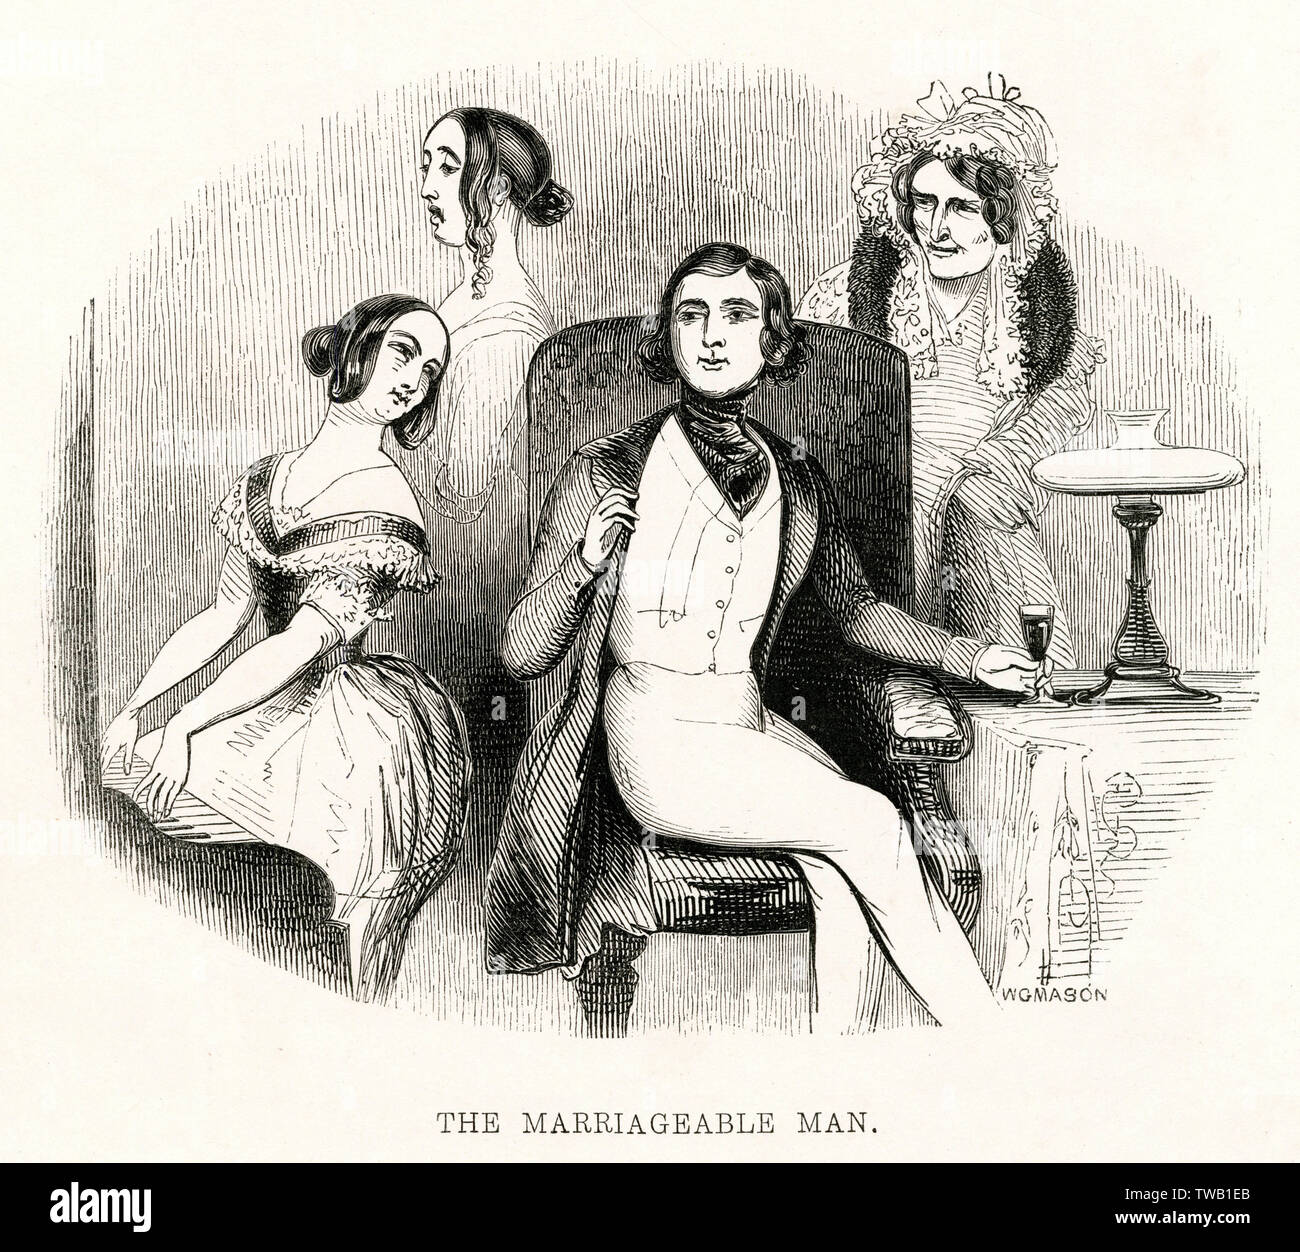 The Marriageable Man - one daughter sings, another sighs, while their mother hovers over her prey to make sure this eligible suitor is firmly hooked to one or the other     Date: 1842 Stock Photo